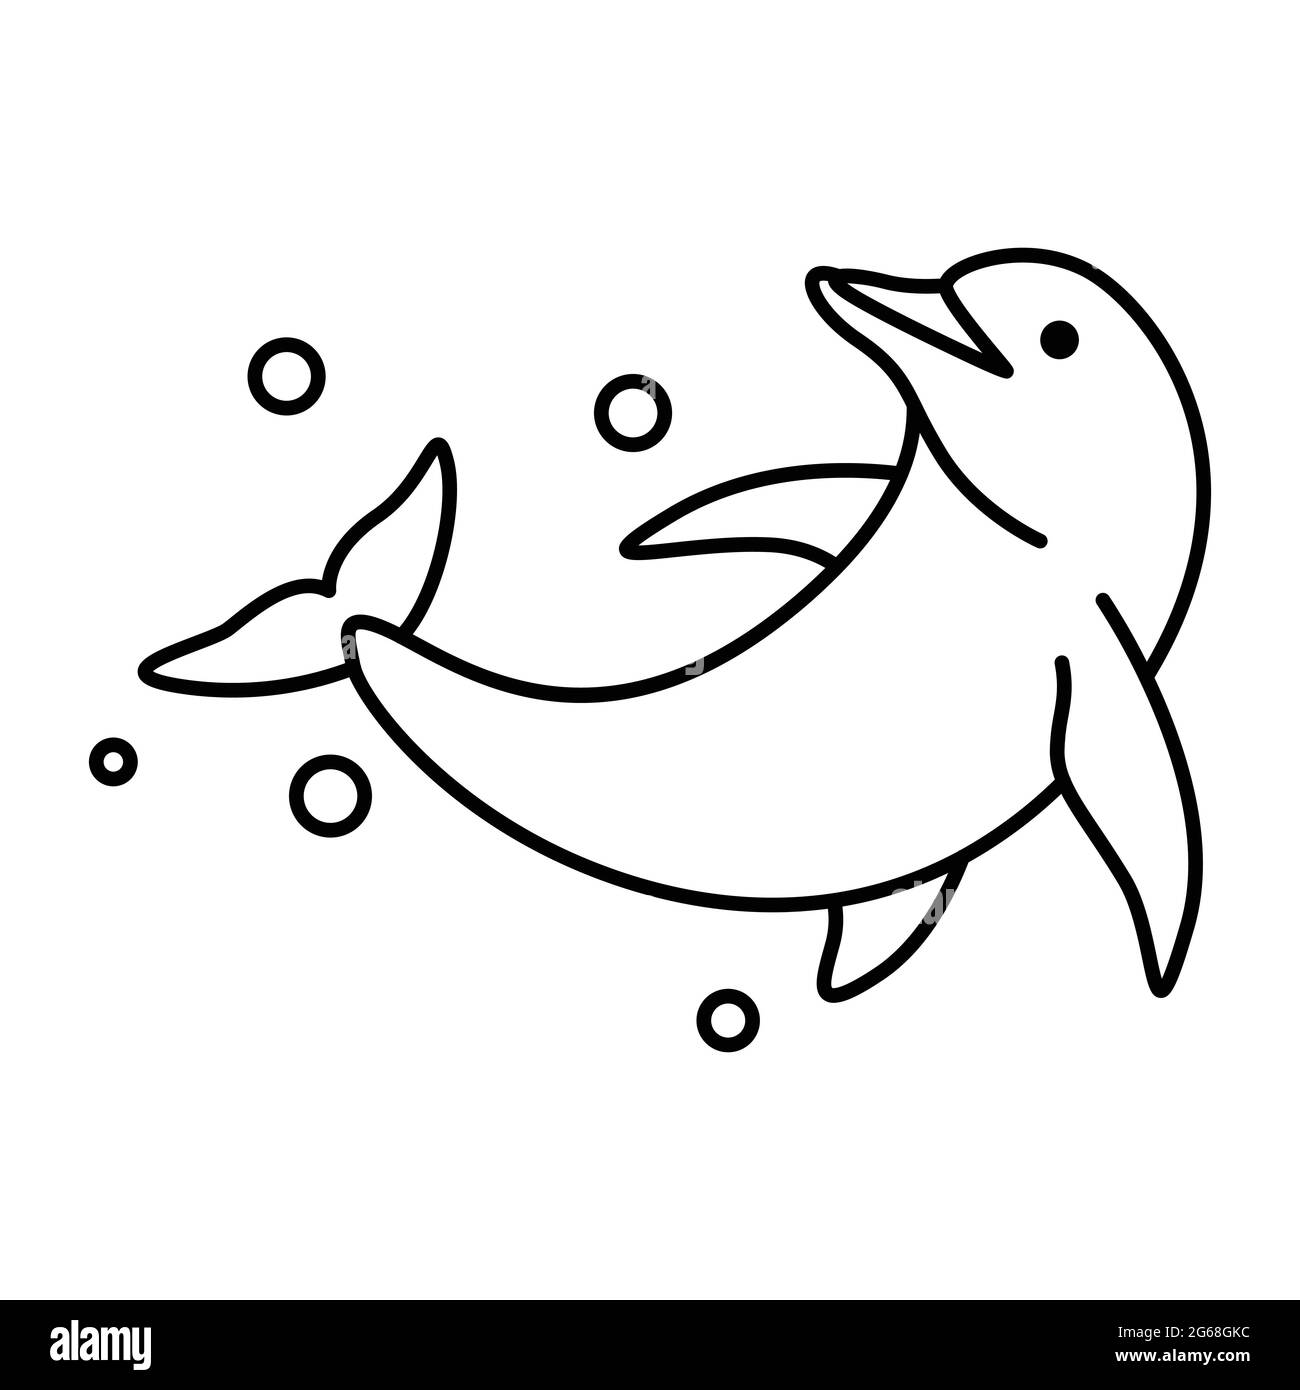 How to Draw a Cartoon Dolphin - Easy Drawing Tutorial For Kids